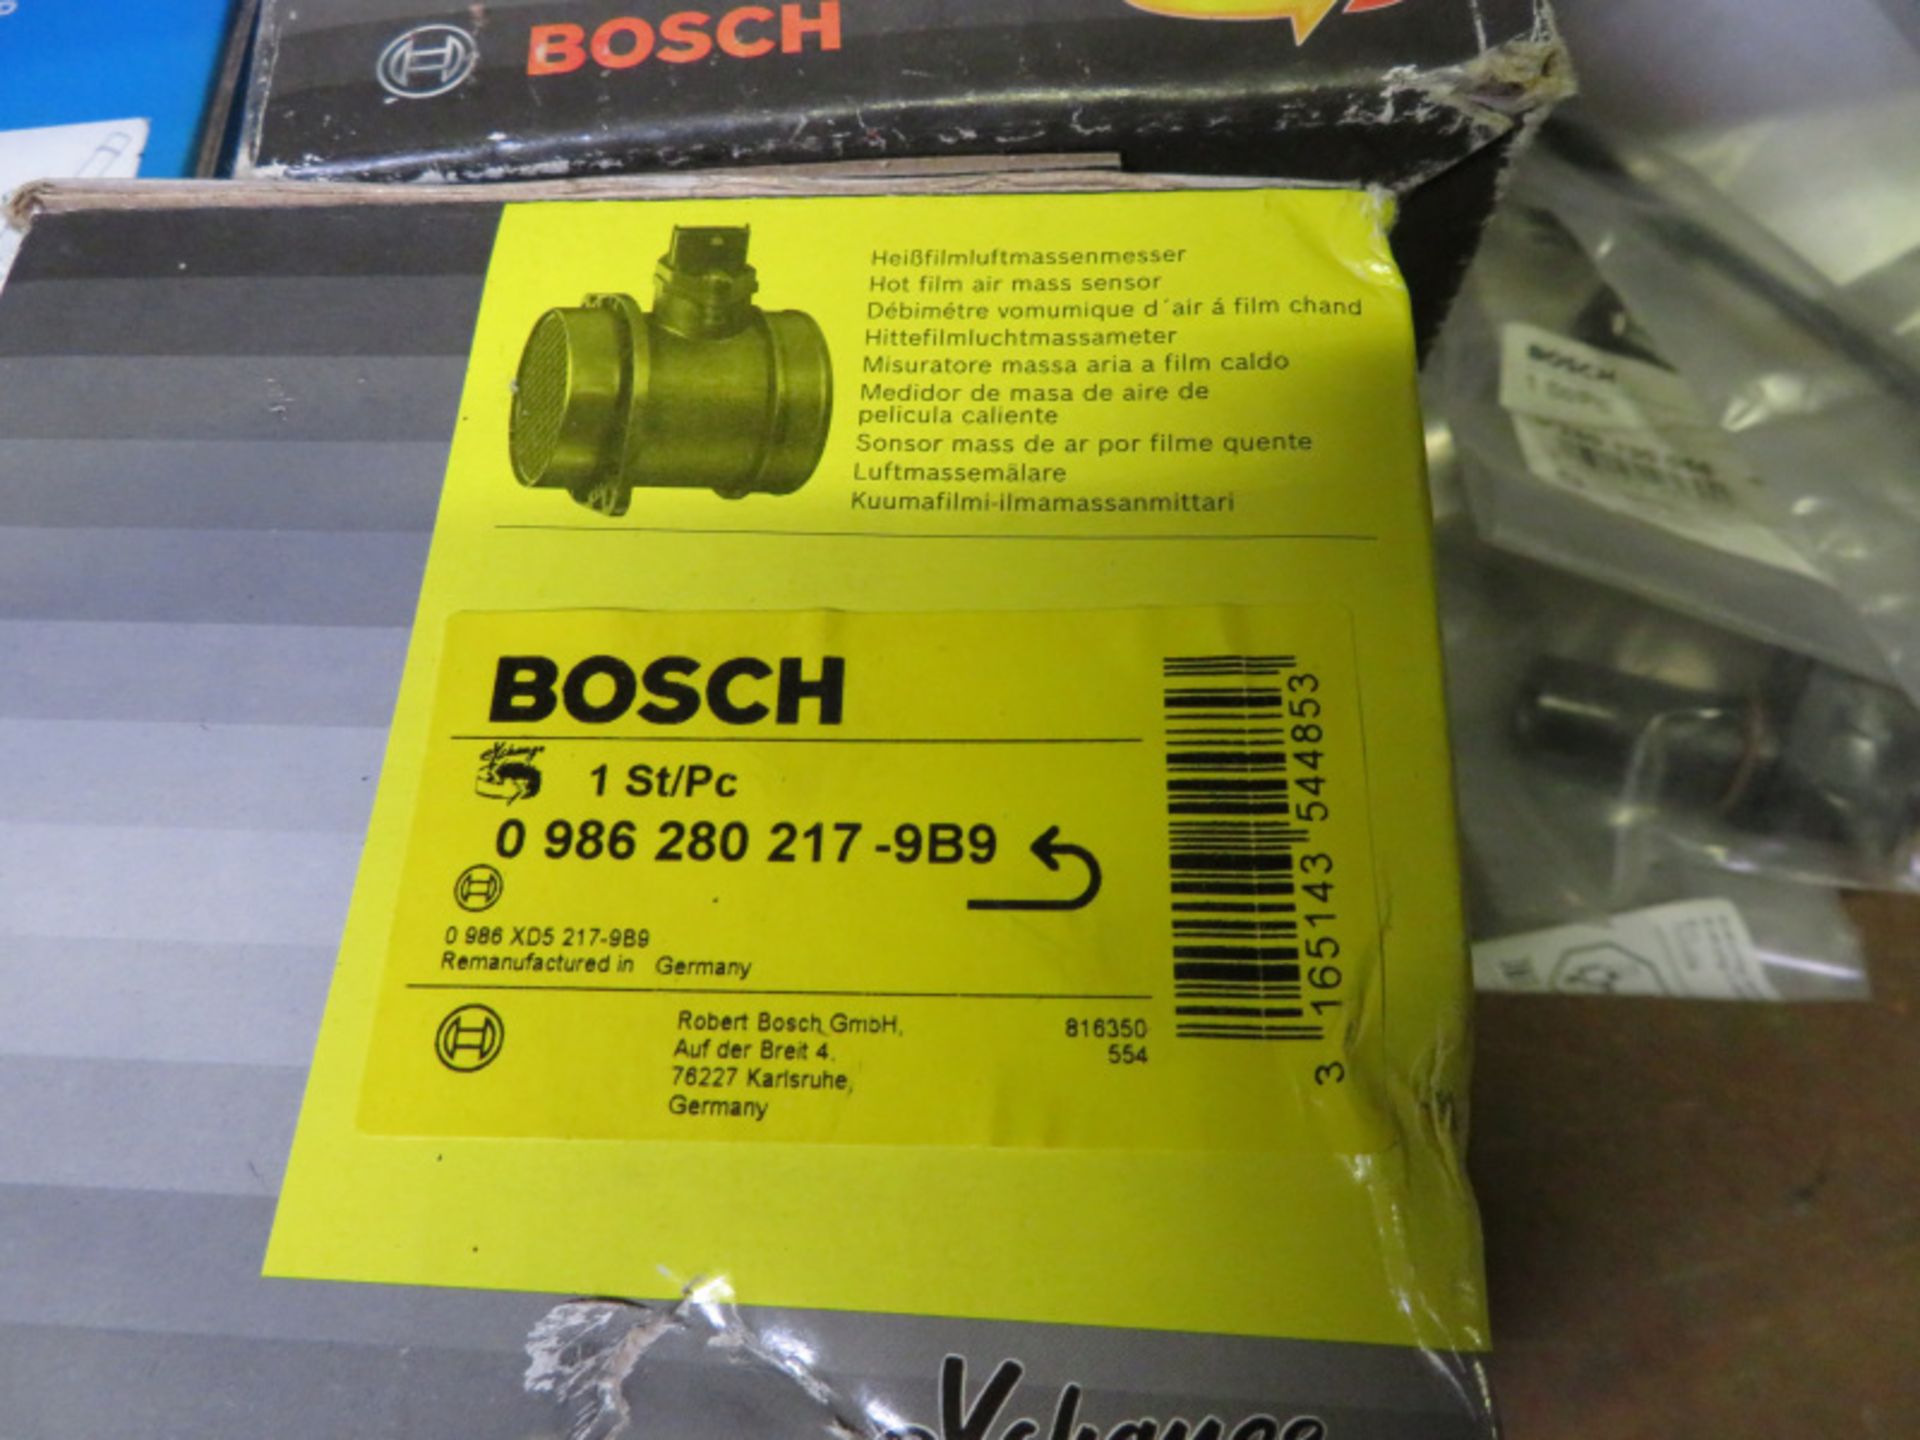 Vehicle parts - Bosch, Delphi, Schaeffler, SKF, ATE - see pictures for models and types - Image 6 of 10